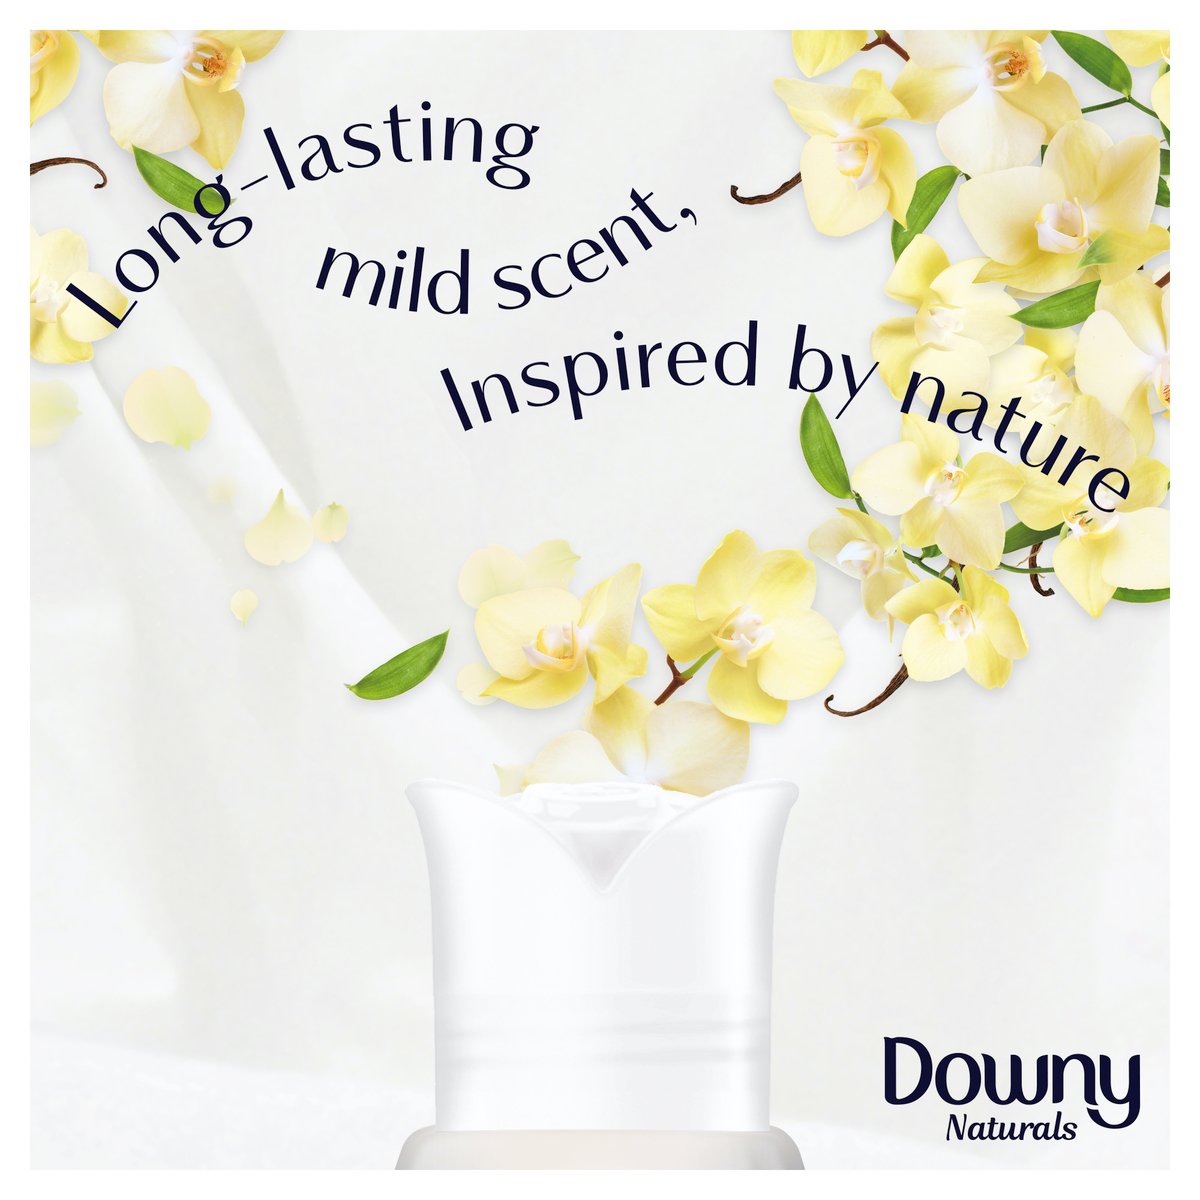 Downy Naturals Concentrate Fabric Softener Vanilla Scent 2 x 880ml